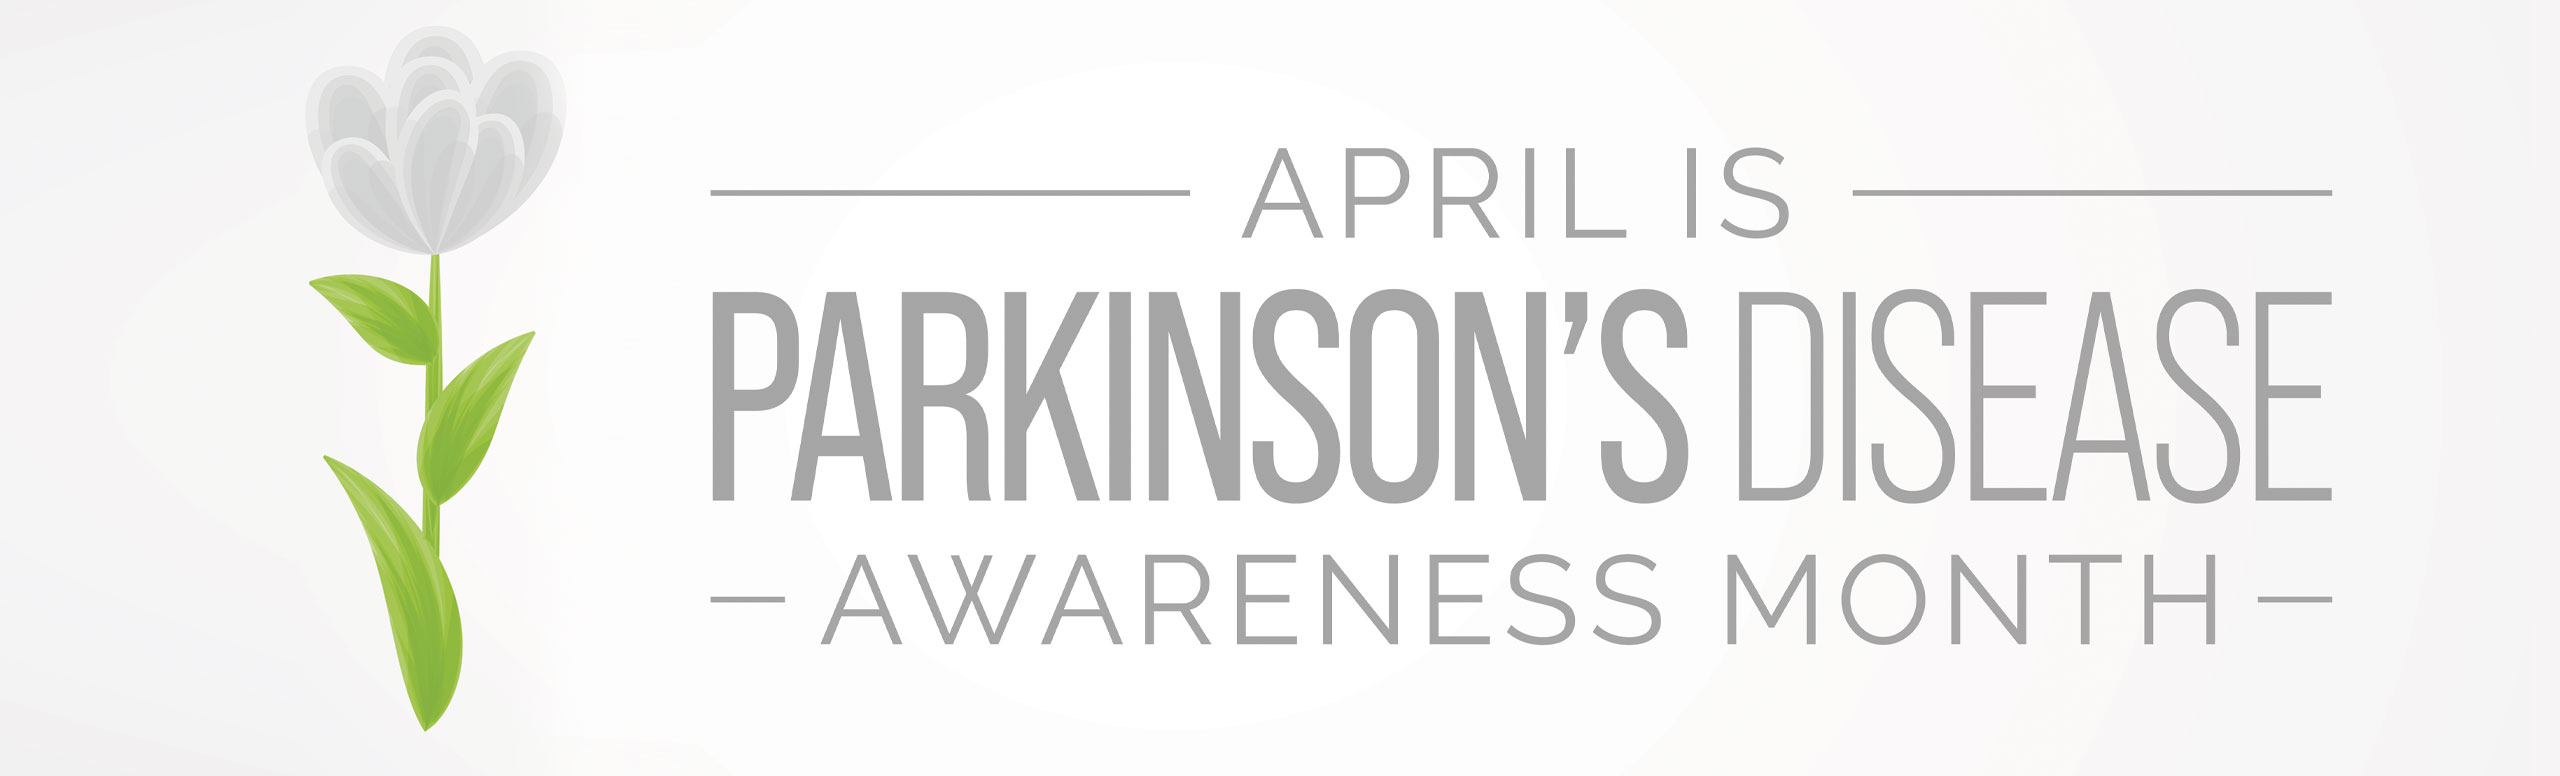 Banner picture of a flower. Banner says:
April is Parkinson's Disease Awareness Month